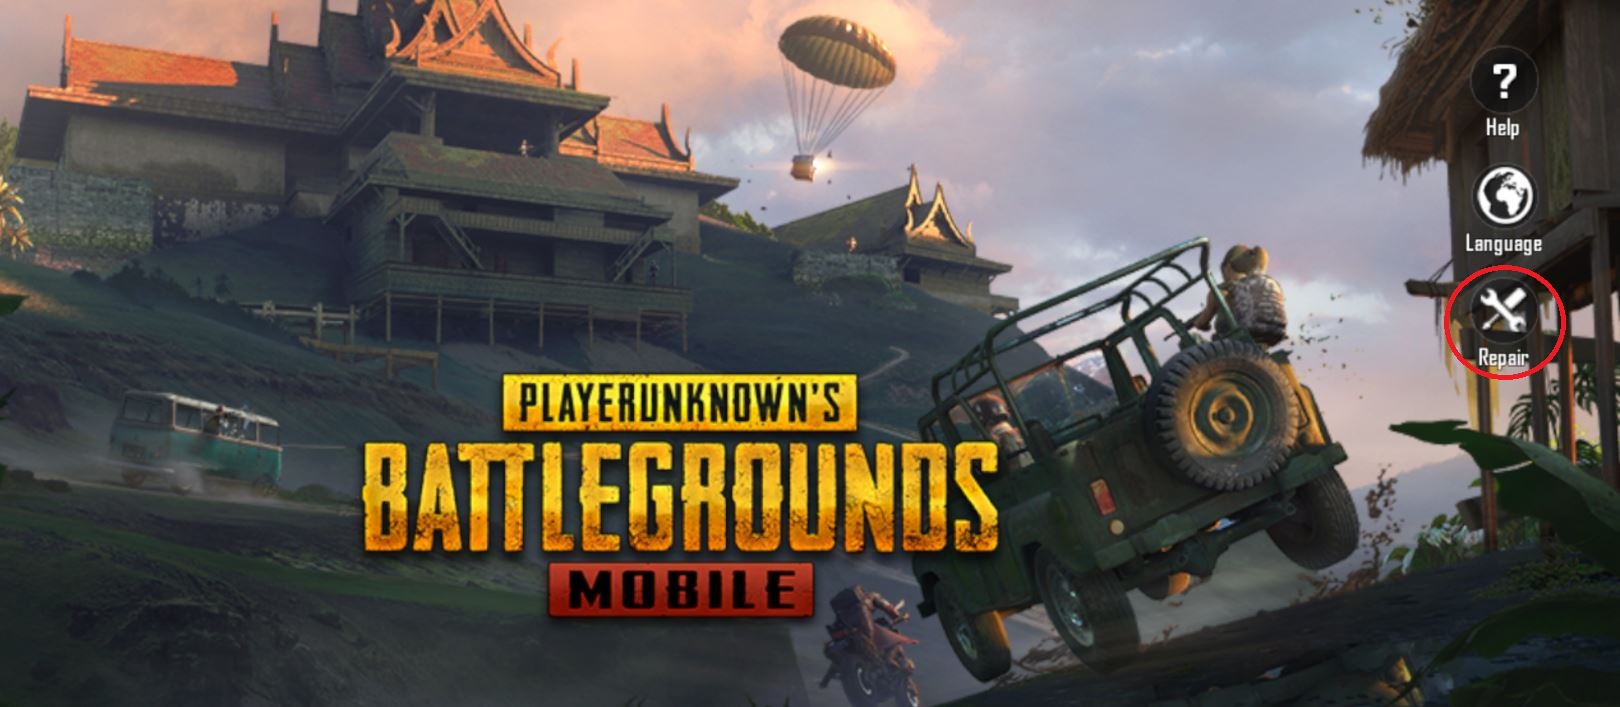 pubg-mobile-mic-not-working